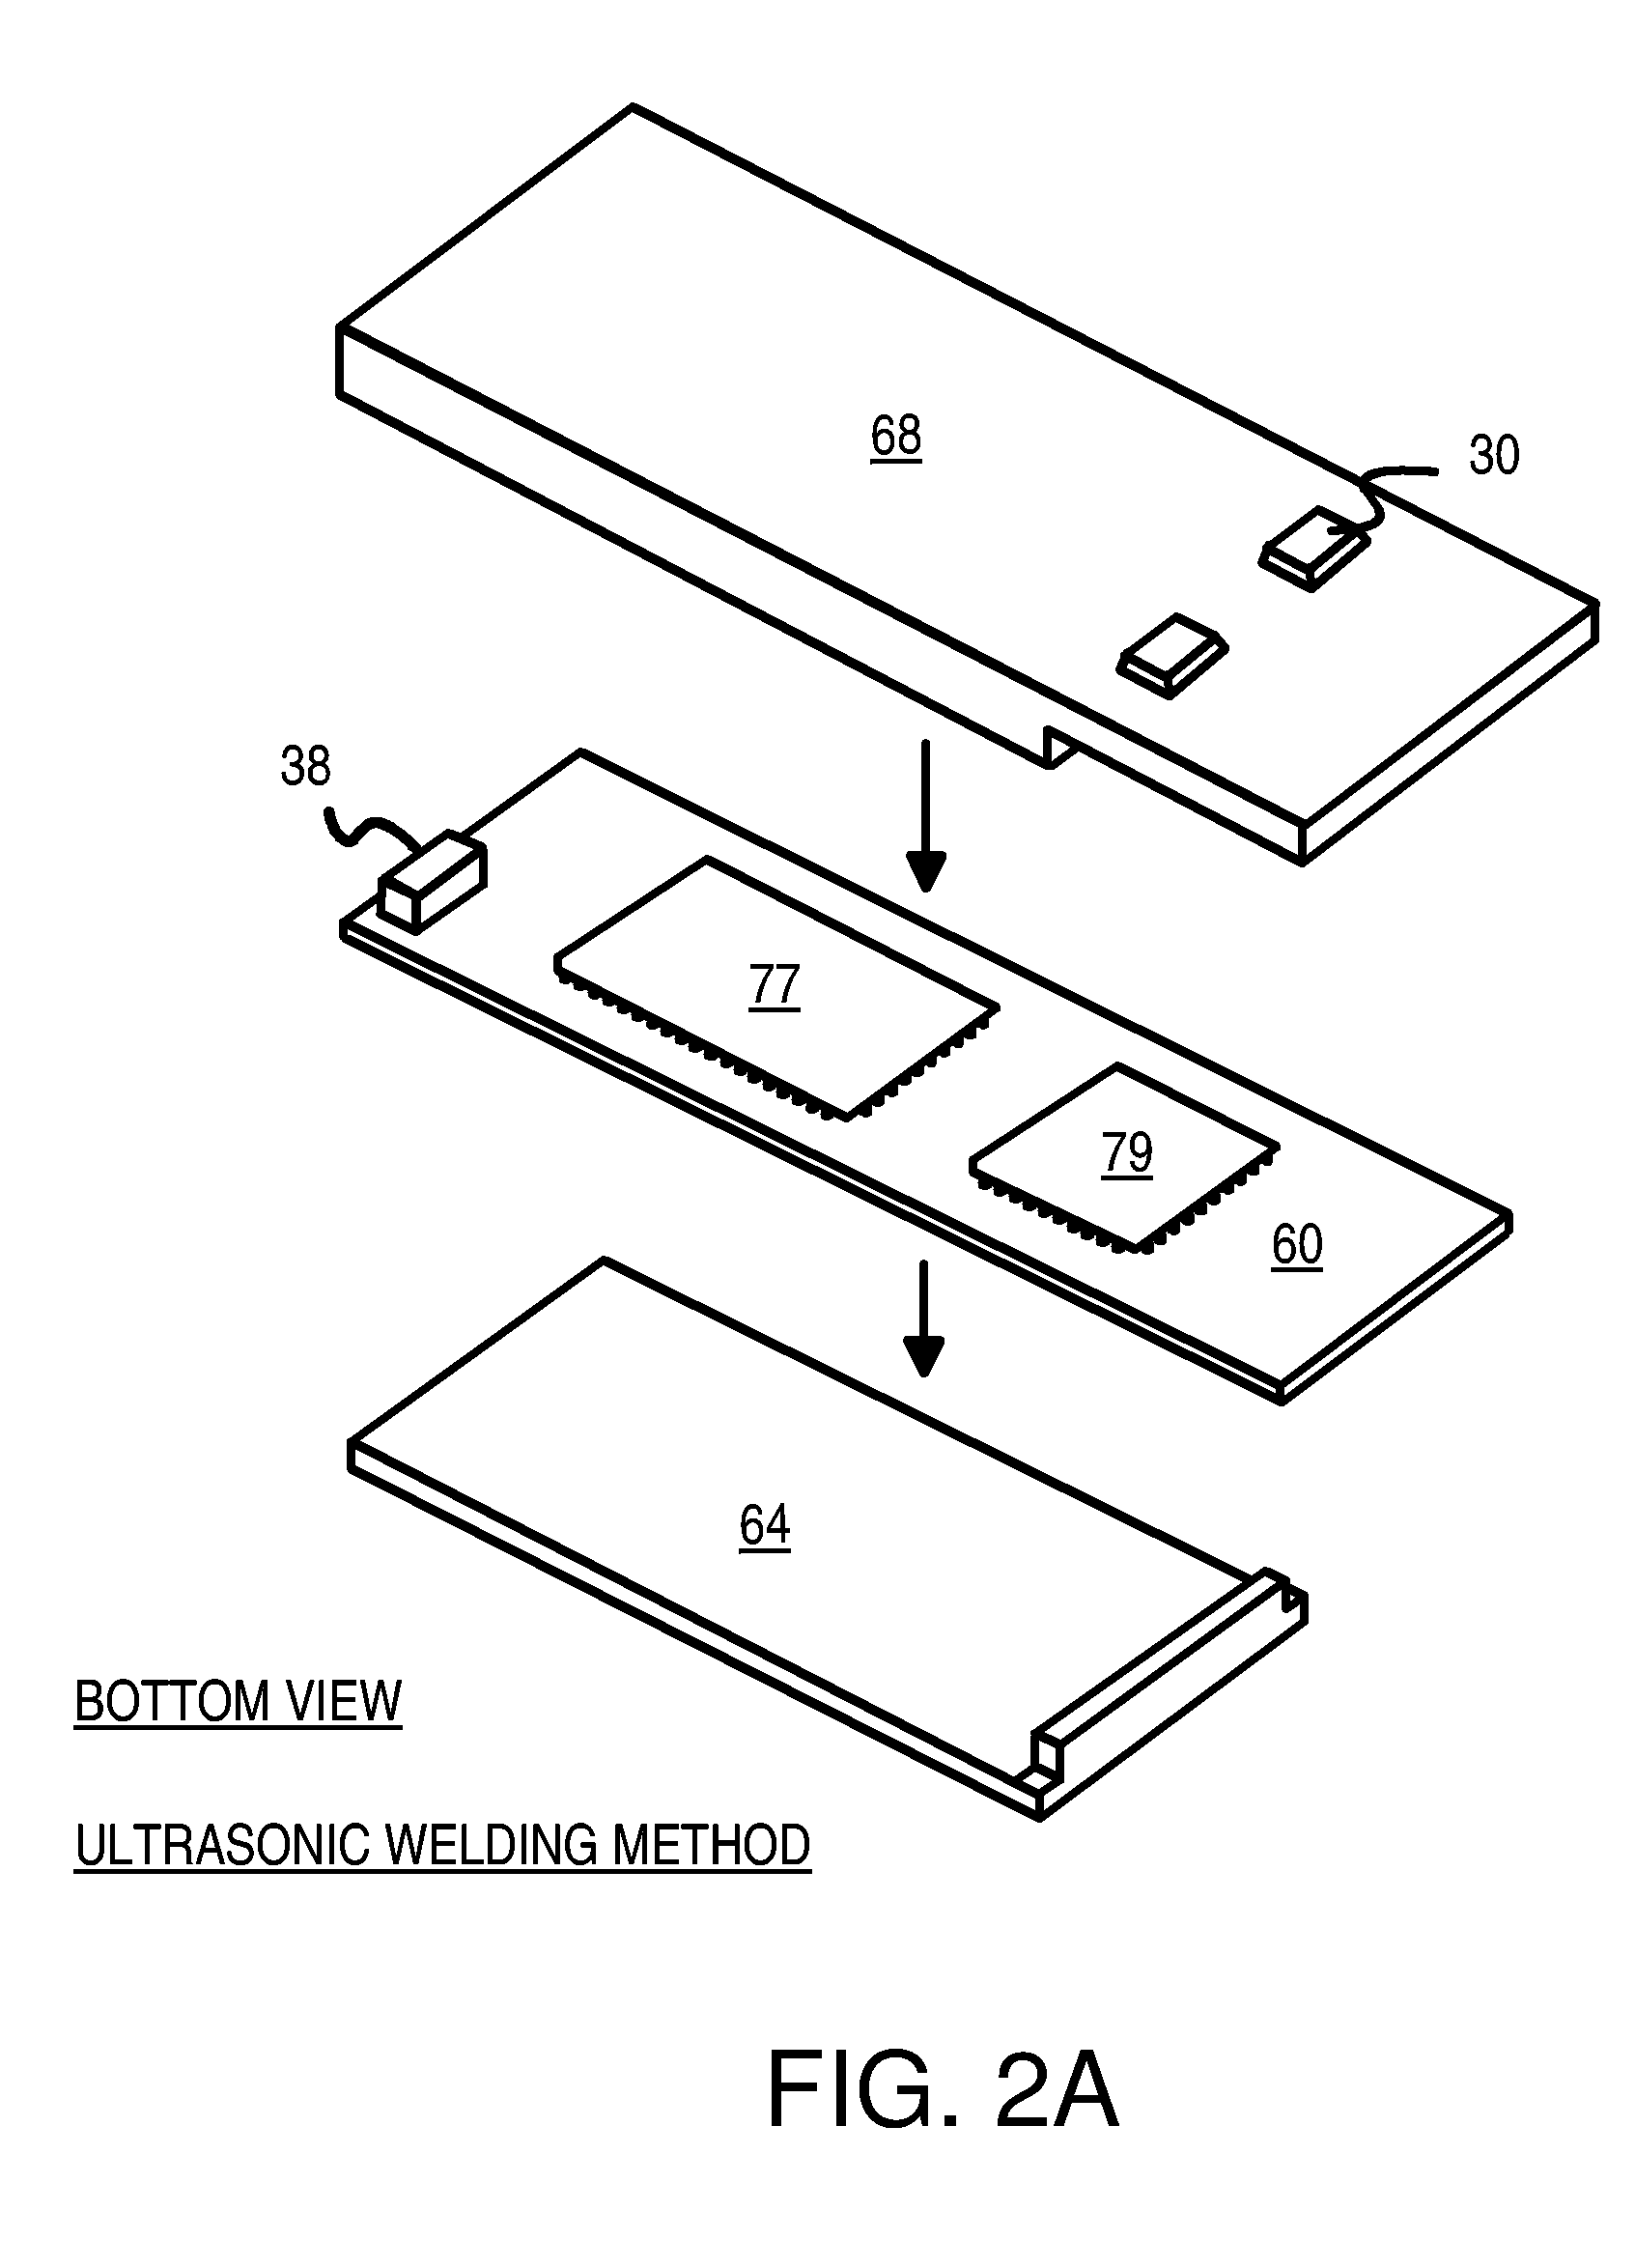 Universal-serial-bus (USB) flash-memory device with metal wrap formed over plastic housing